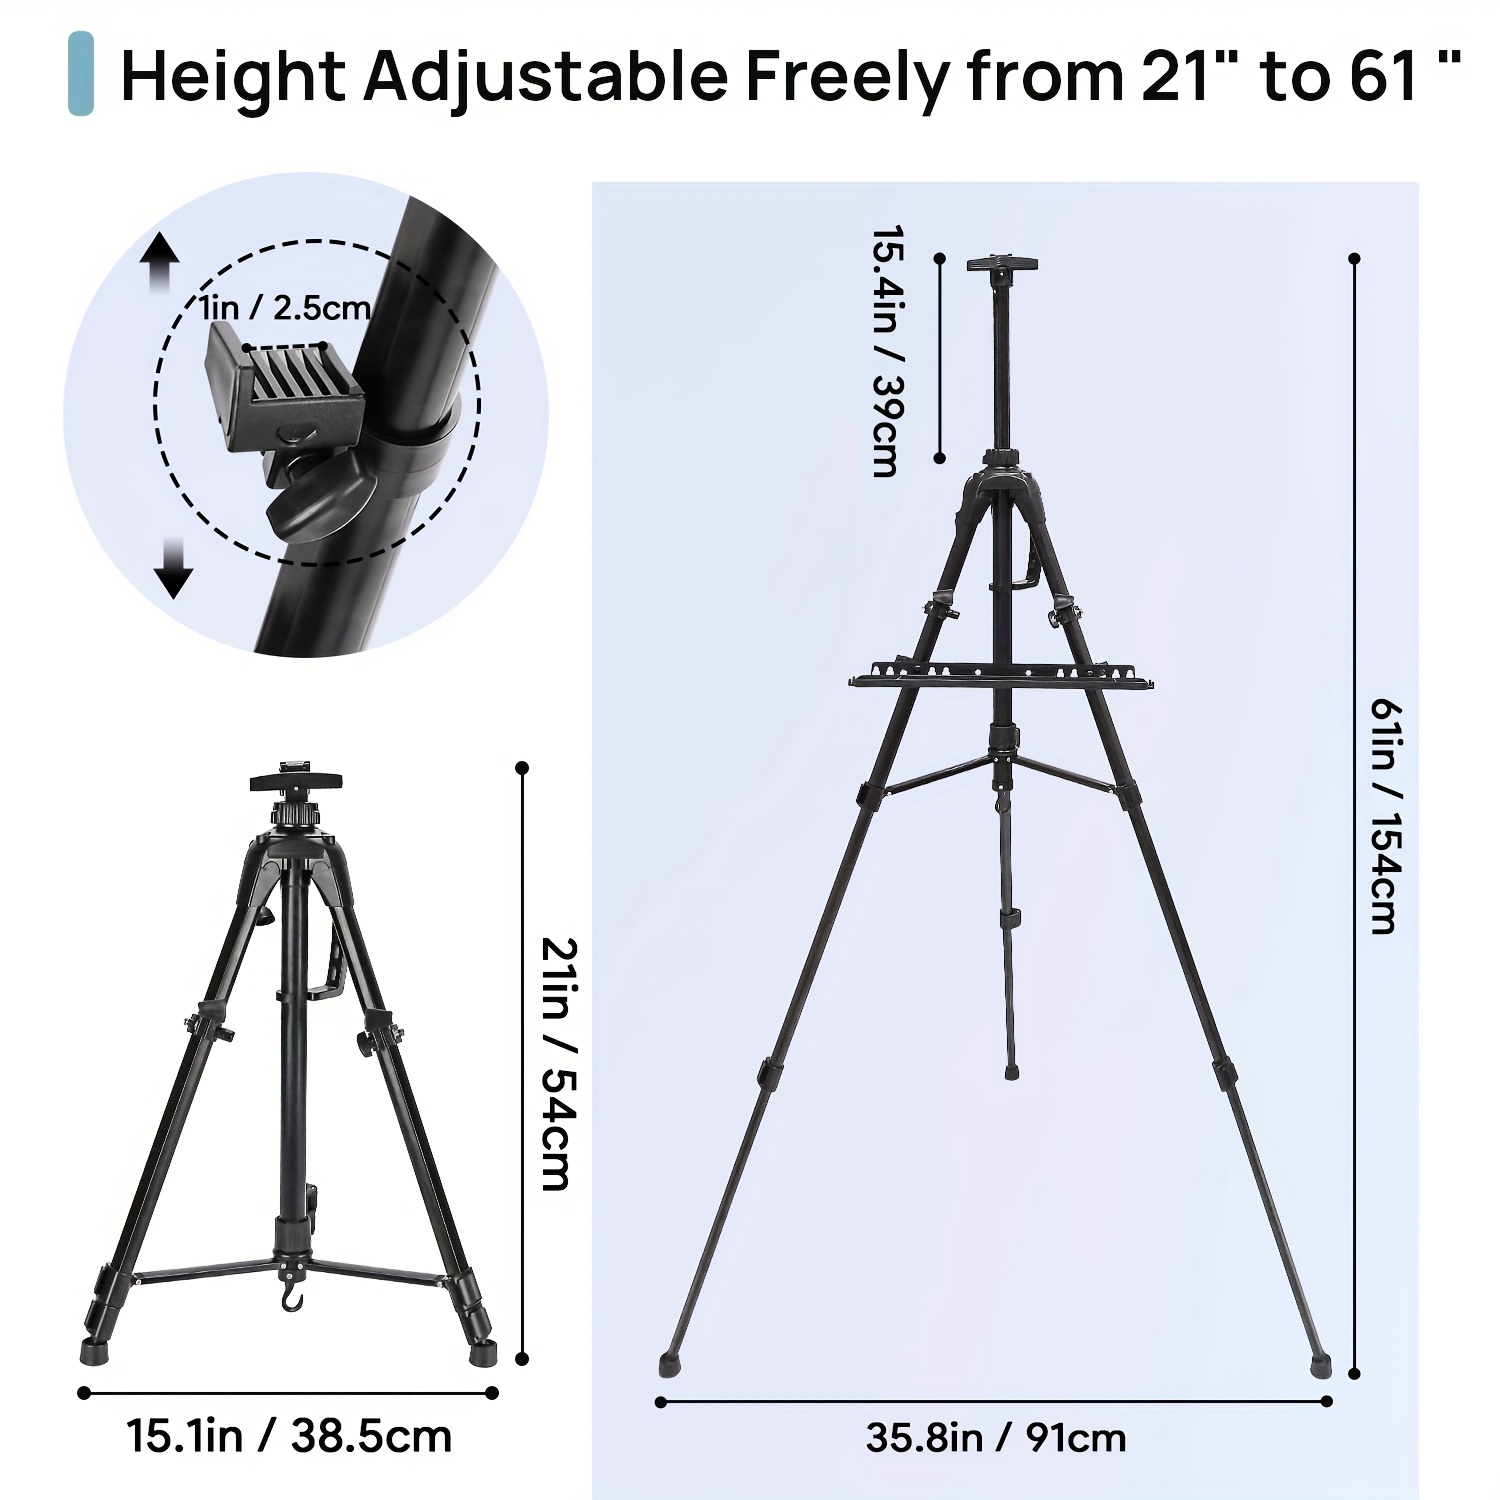 Portable Artist Easel Stand - Adjustable Height Painting Easel with Bag -  Table Top Art Drawing Easels for Painting Canvas, Wedding Signs & Tabletop  Easels for Display - Metal Tripod - 21x66 inches